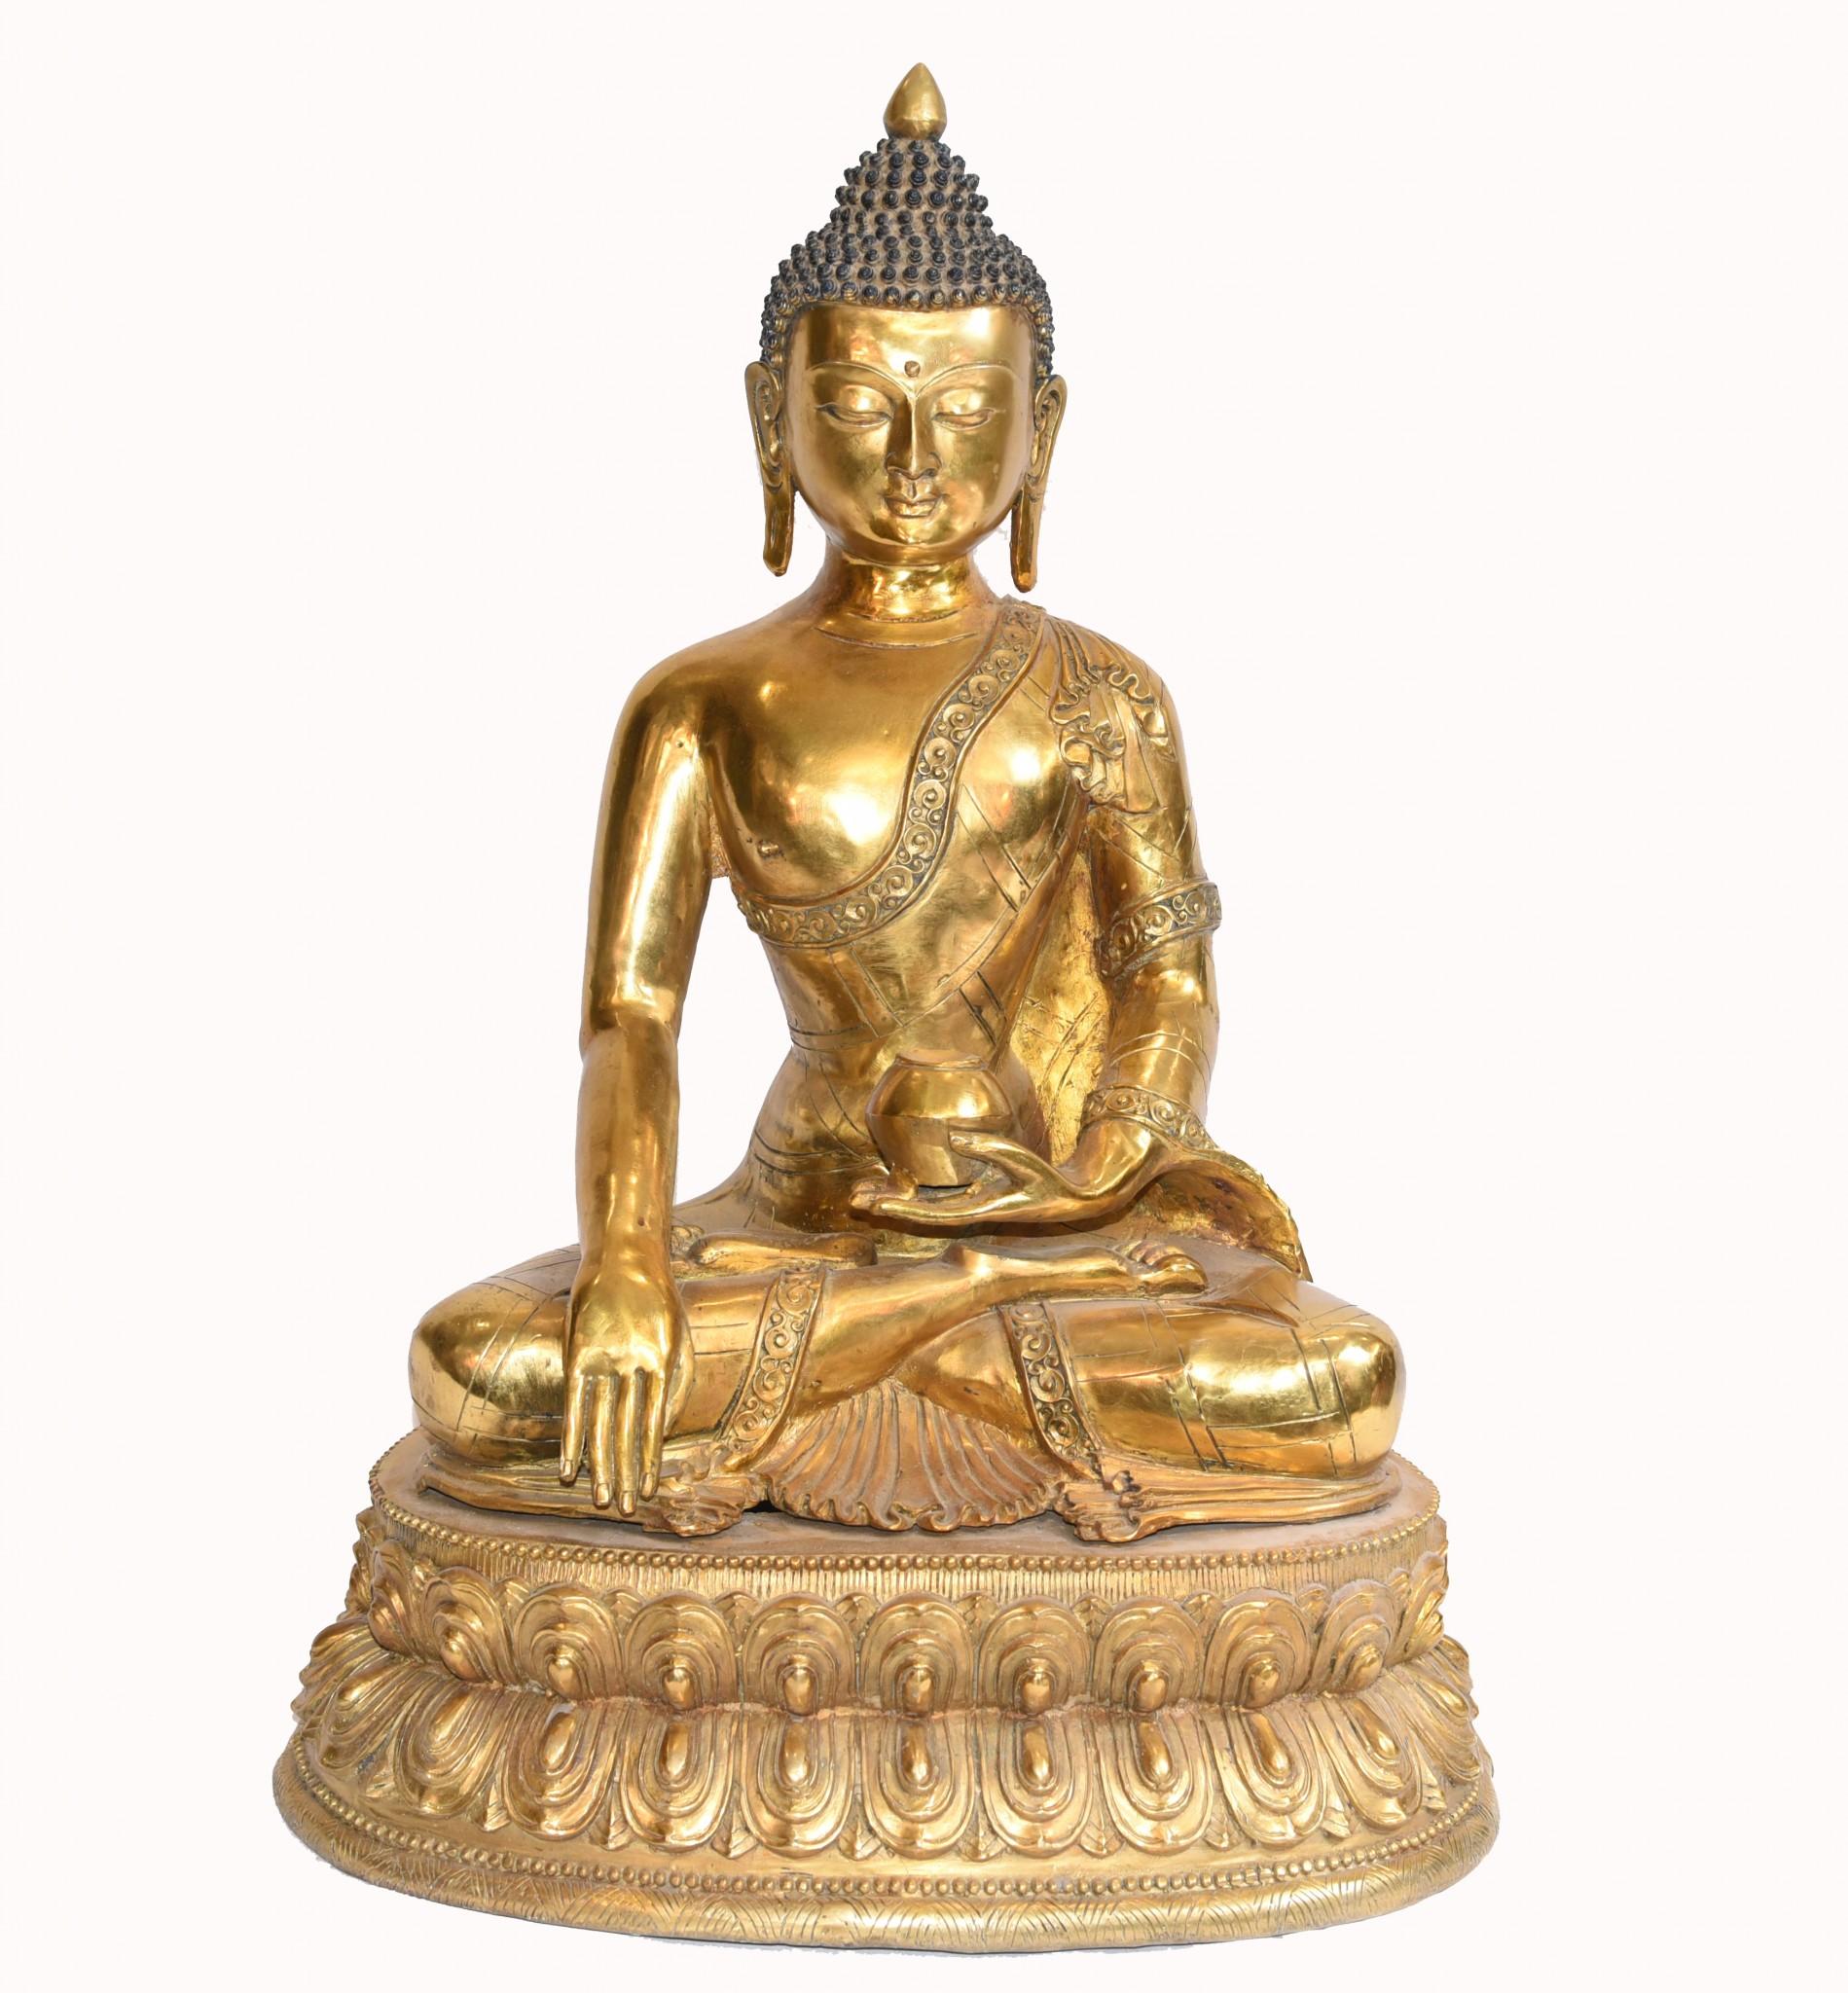 Nepalese Buddha Statue Meditation Casting Lotus Throne Sculpture For Sale 11